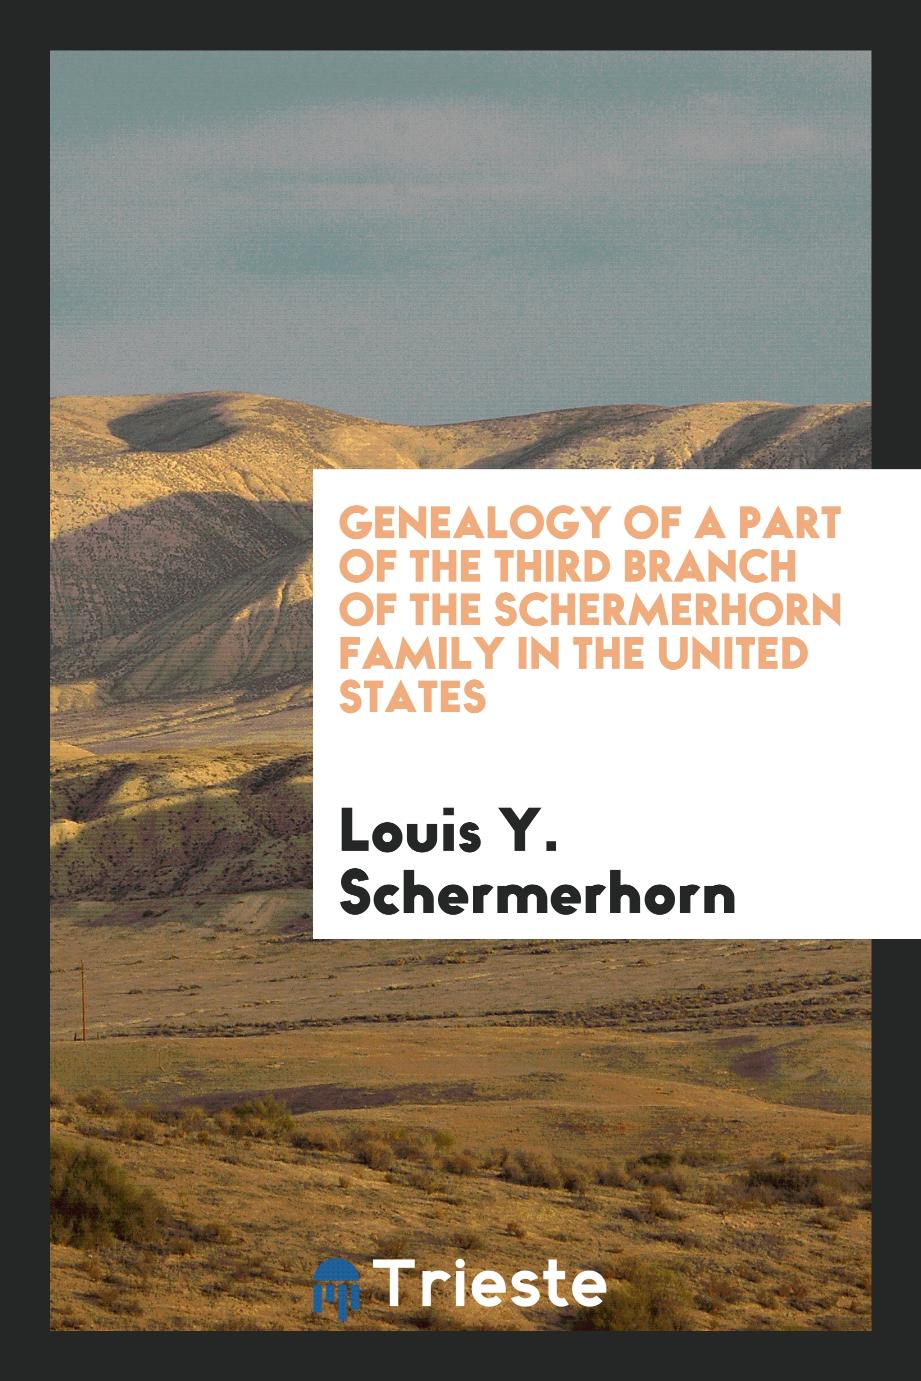 Genealogy of a part of the third branch of the Schermerhorn family in the United States